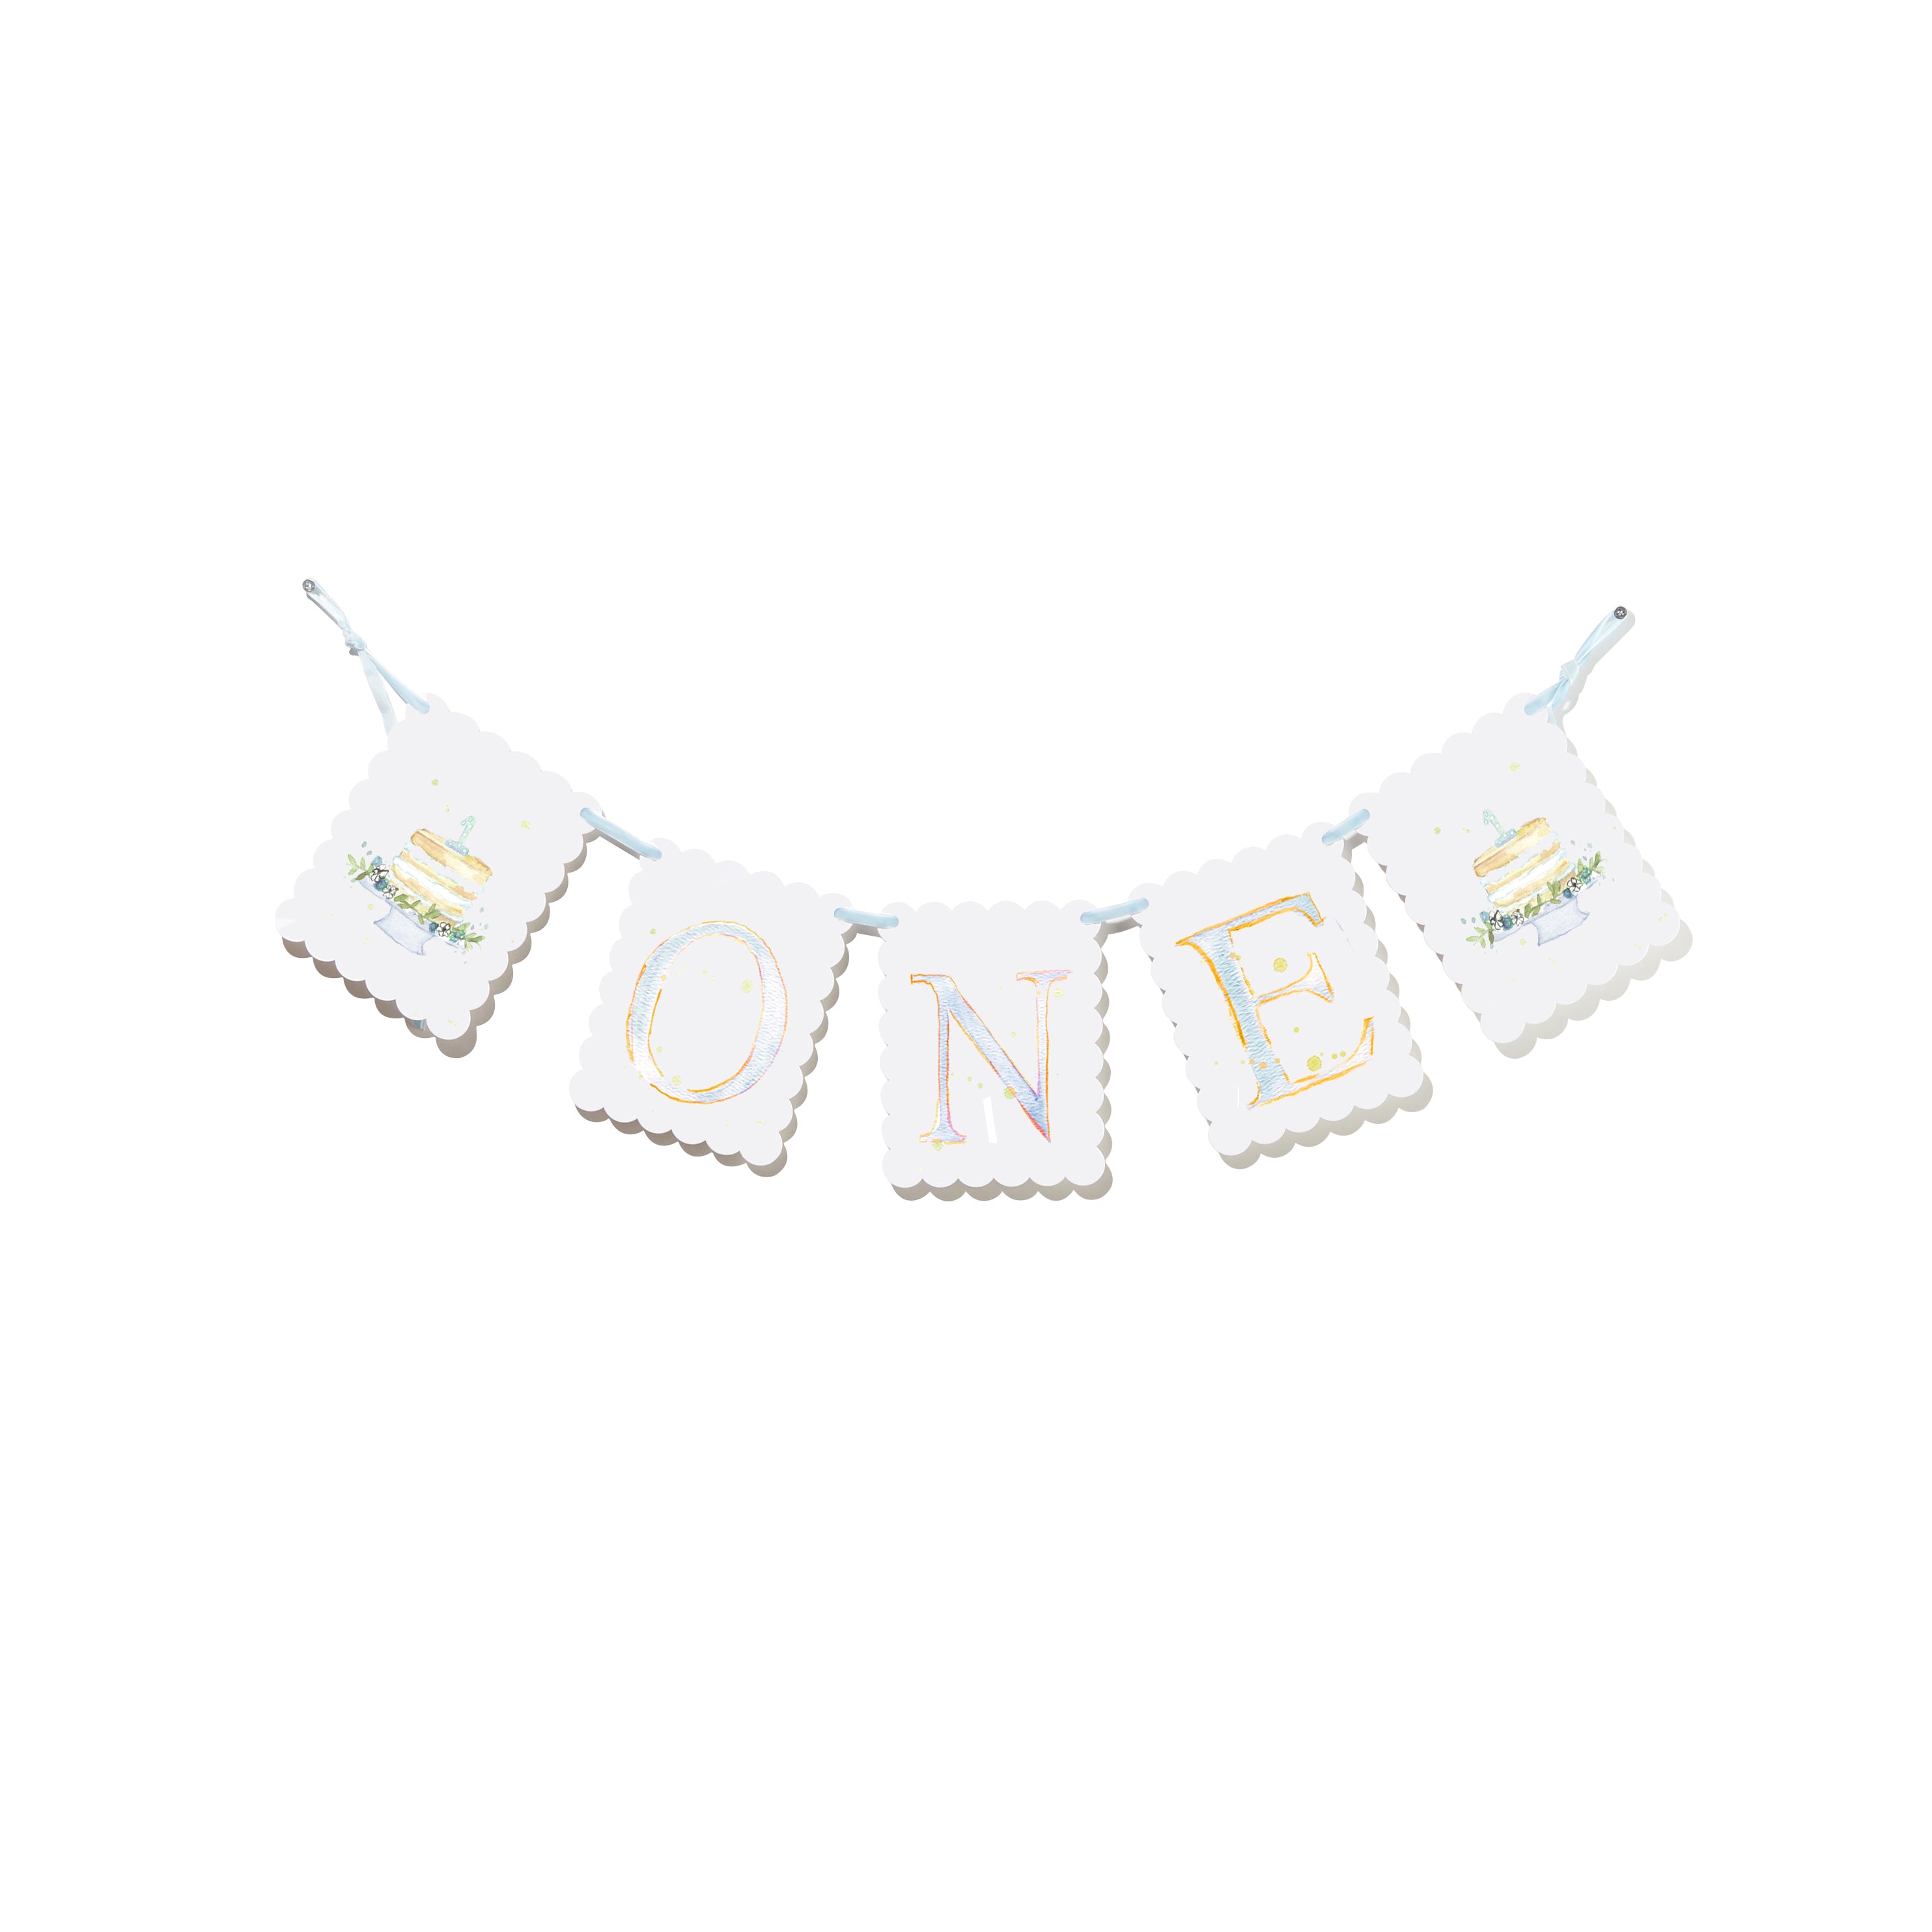 "ONE" Highchair Banner with Cake End Pieces